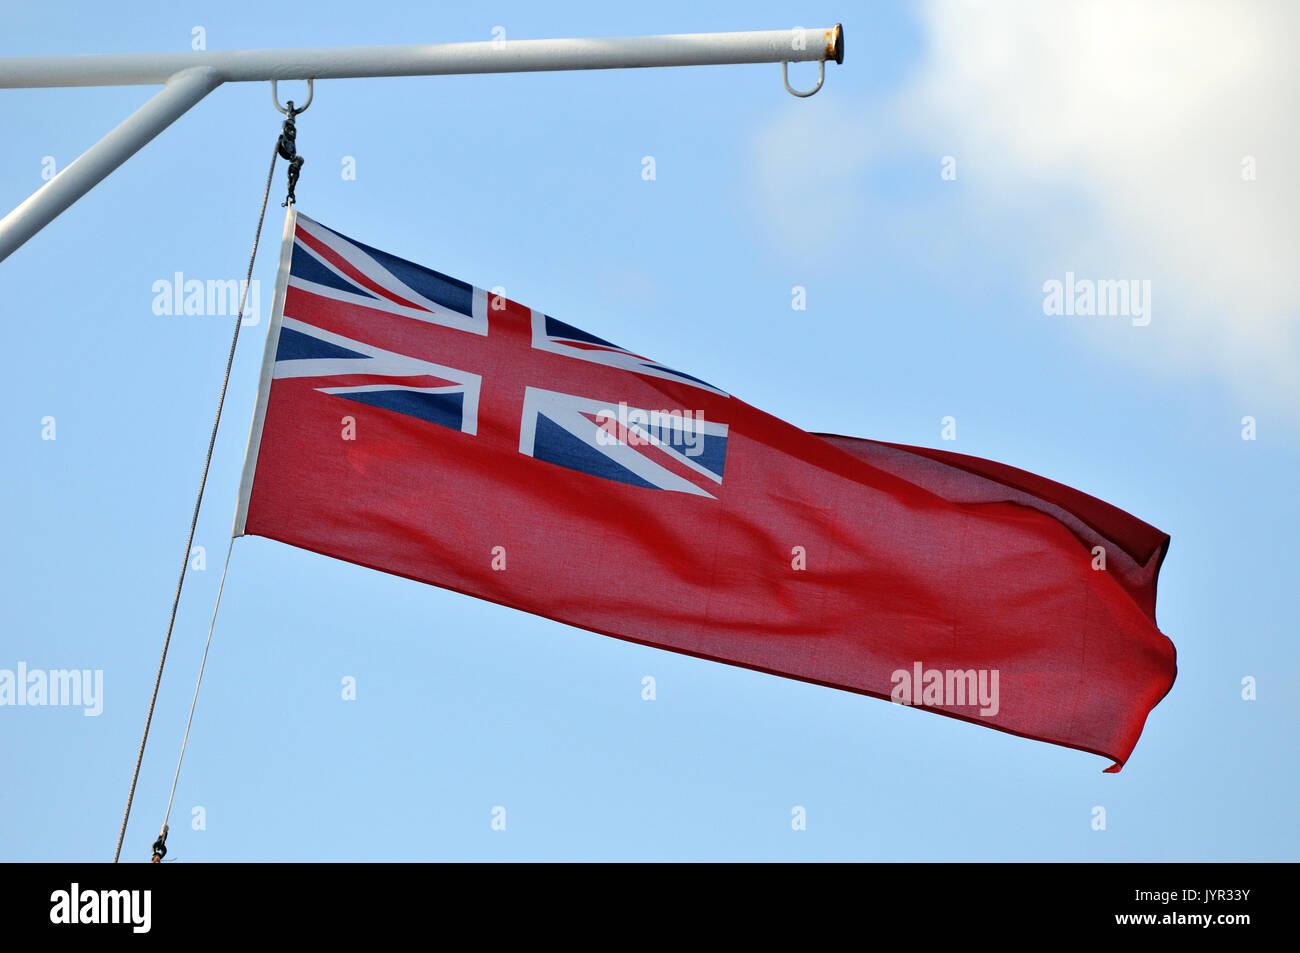 Foster celle Først The red duster or red ensign flag of the merchant navy or british fleet  with the union flag or jack in the corner on a red ground. Nautical  maritime Stock Photo -